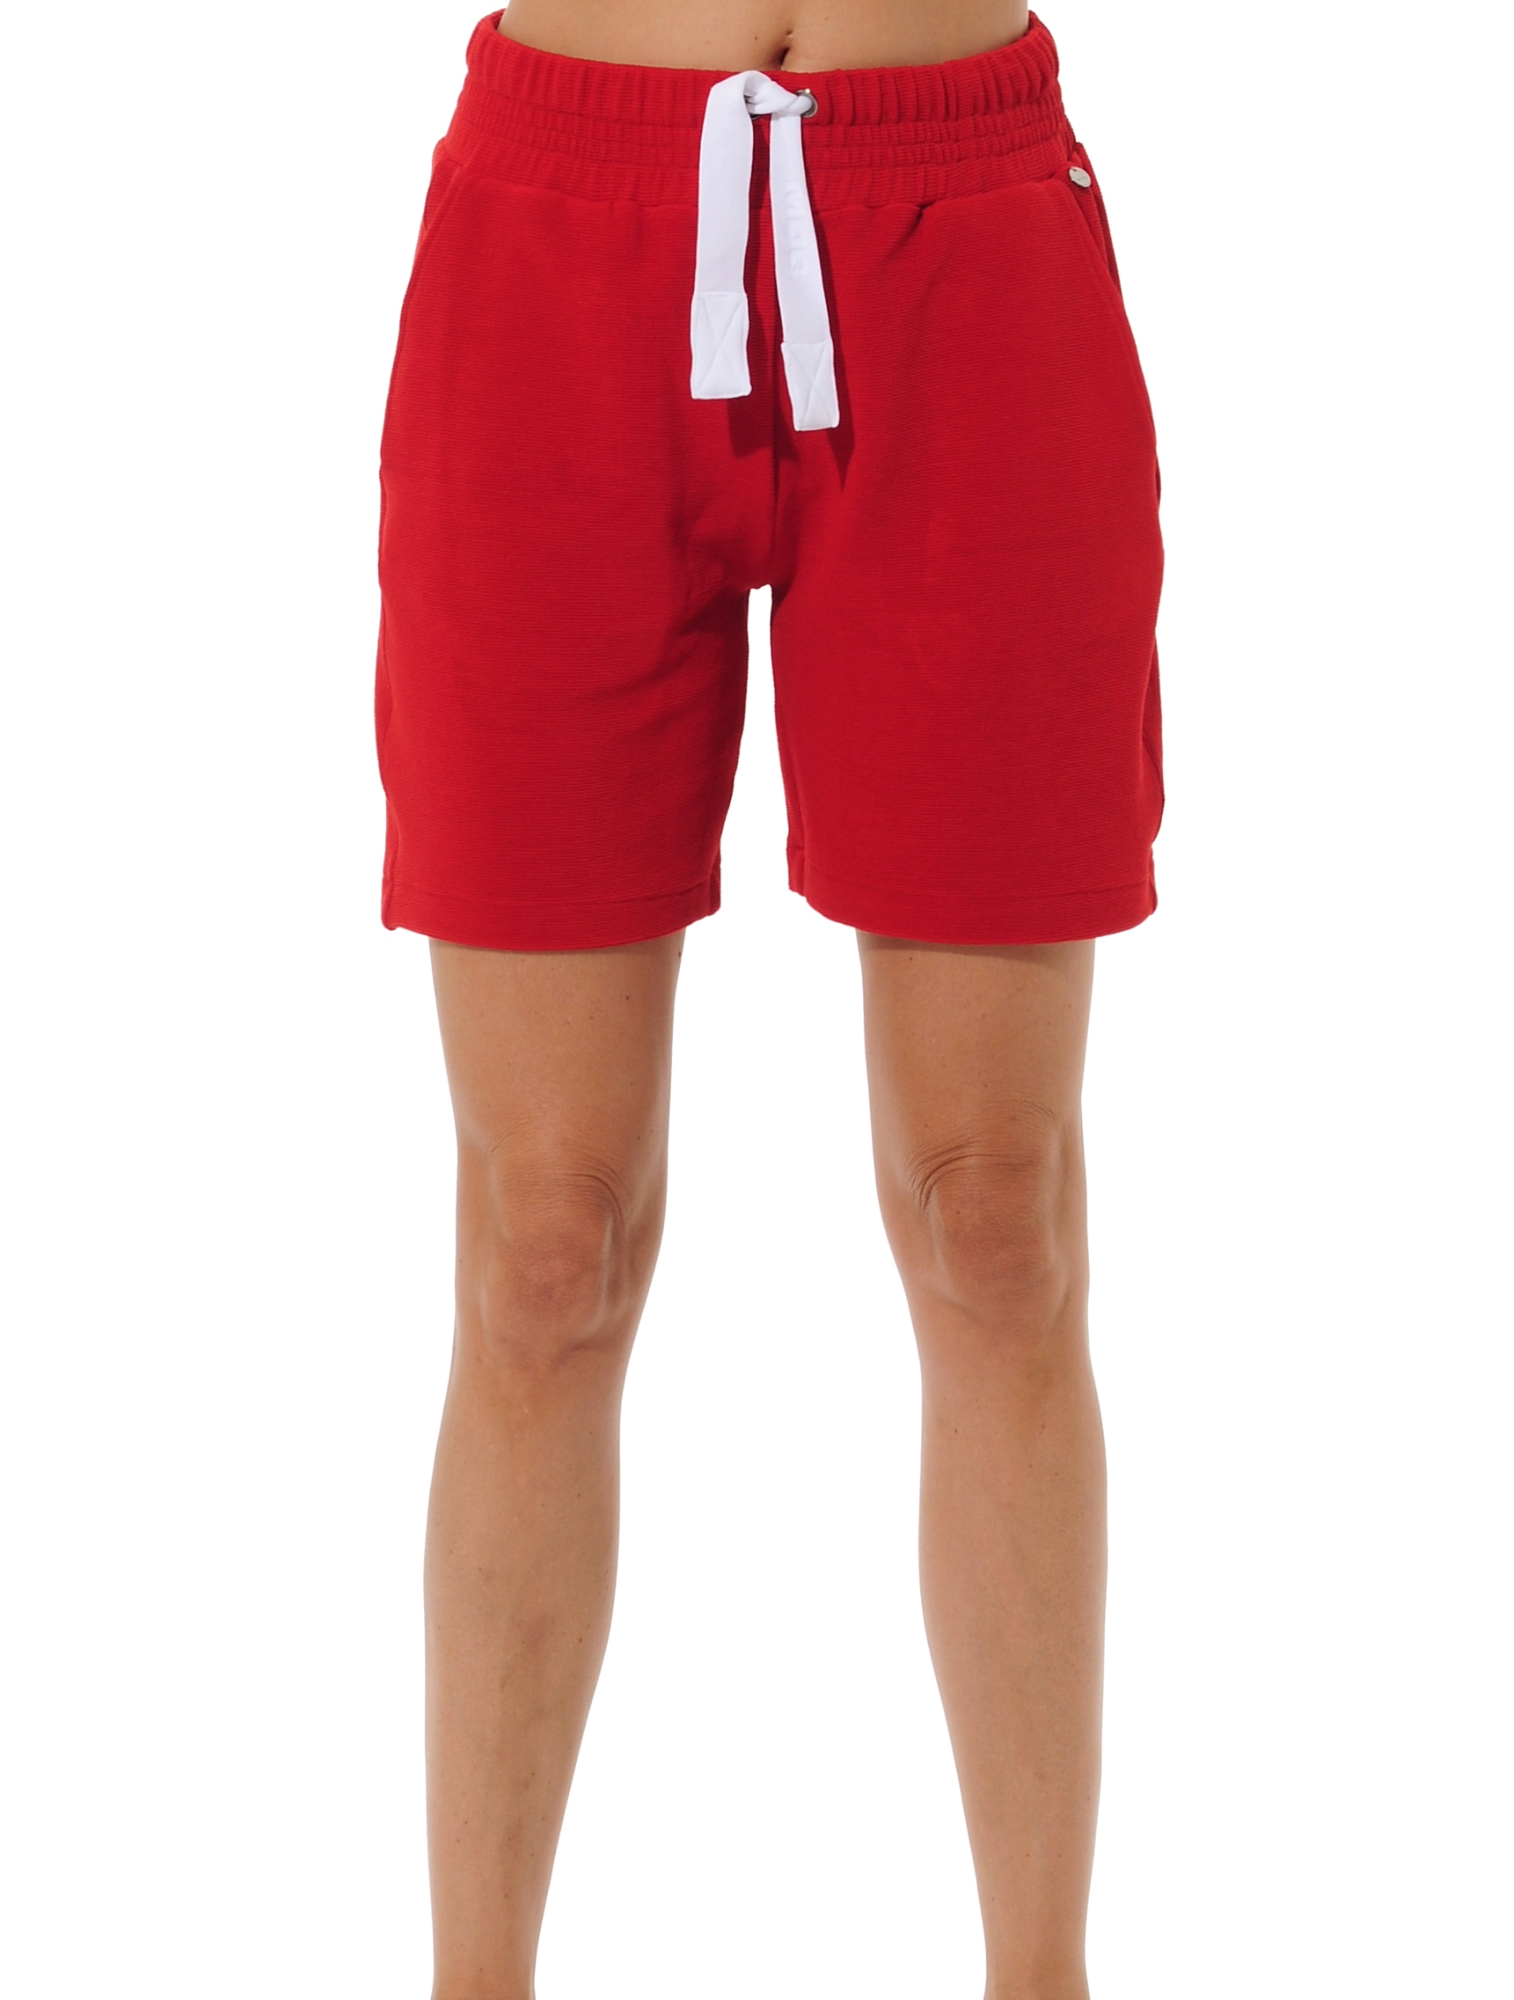 Towelling knit shorts red